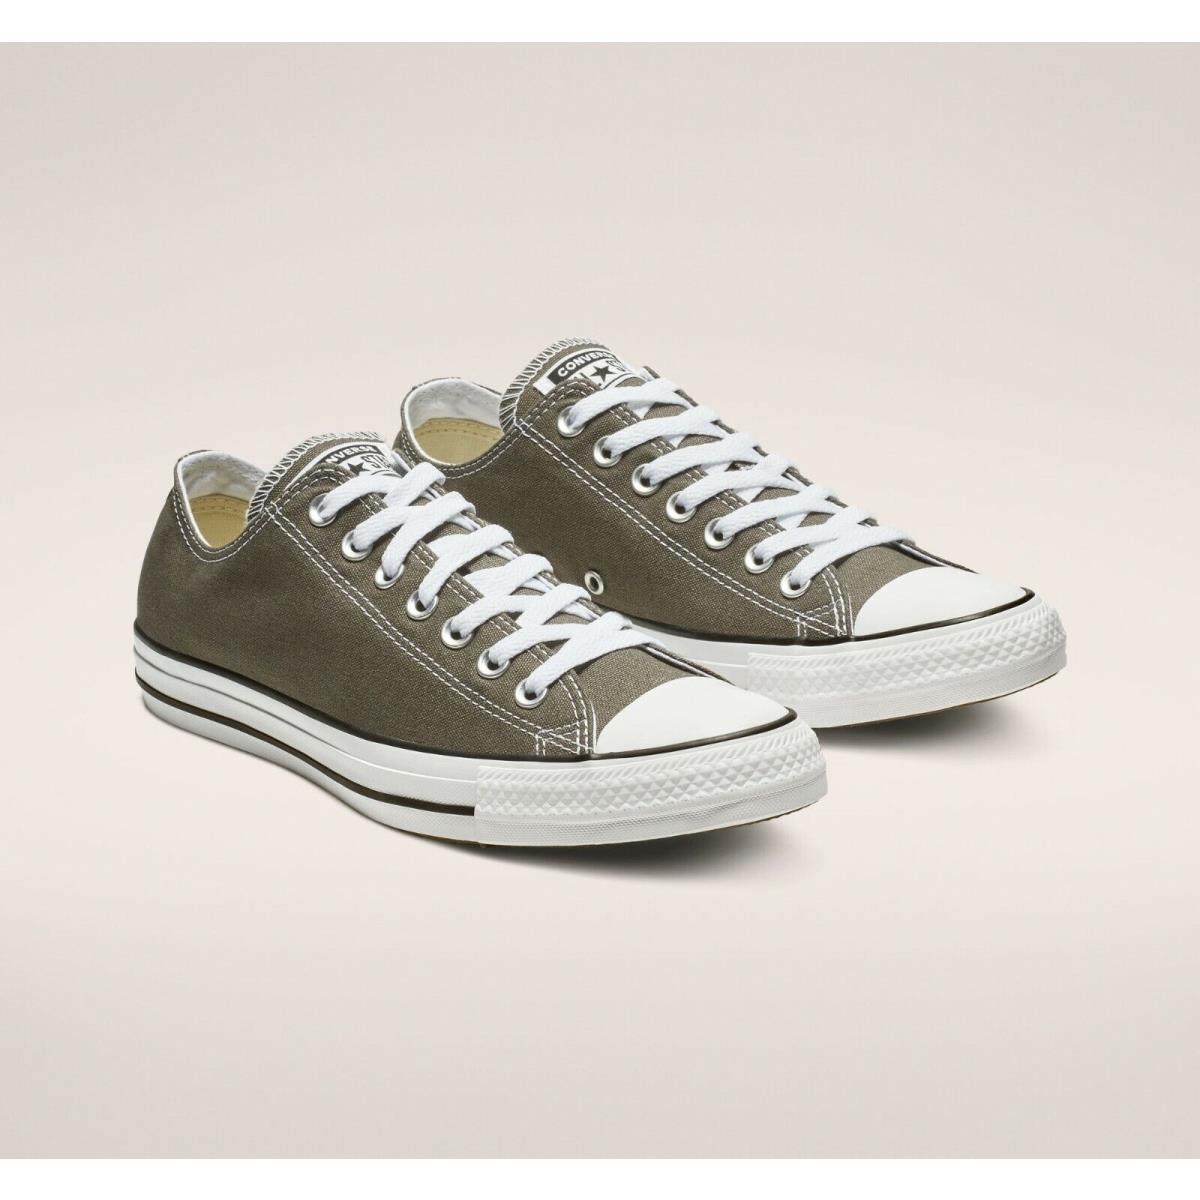 Classic Converse Unisex Chuck Taylor All Star Low Sneaker Canvas Upper Mens Size Charcoal